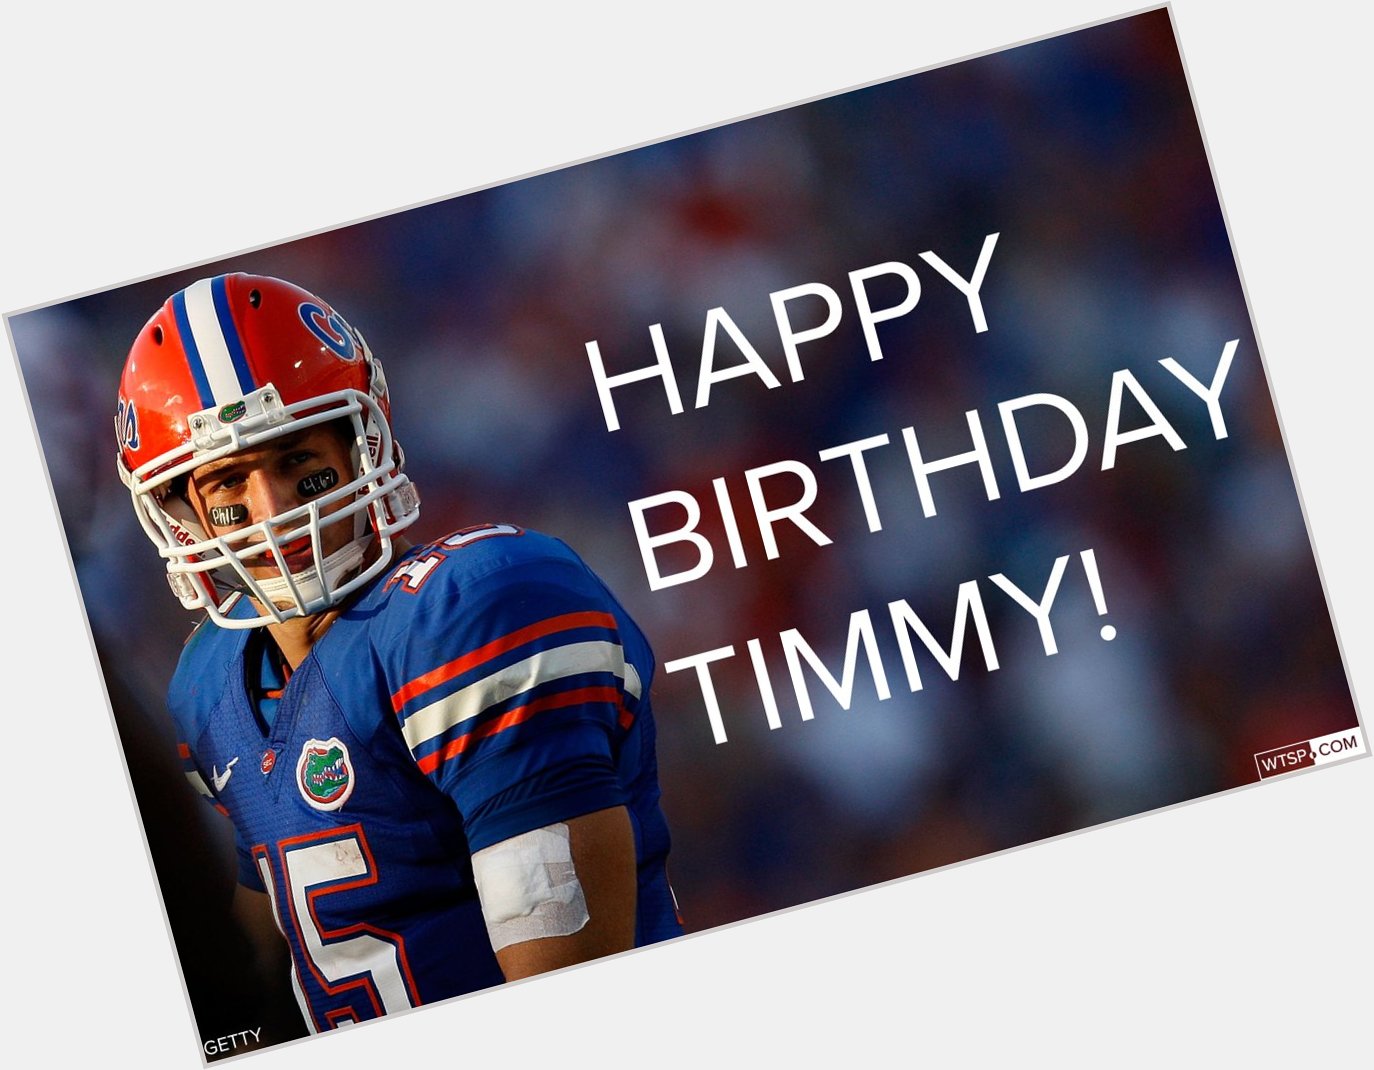 Join us in wishing a happy birthday to Florida legend Tim Tebow! 31 looks good on you!  